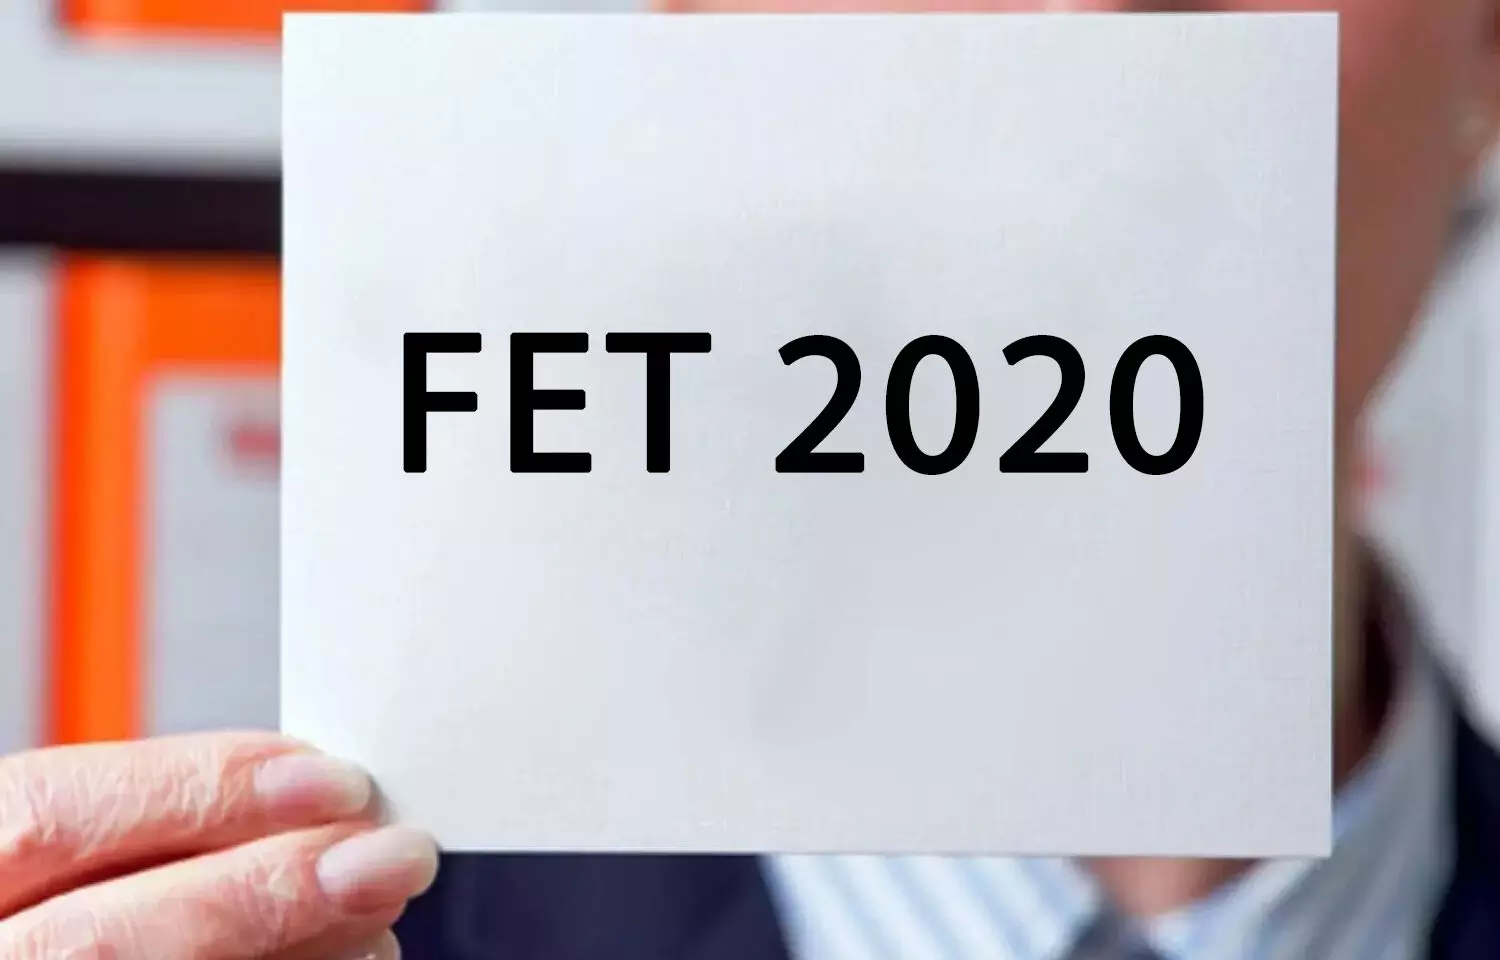 FET 2020: NBE releases Fellowship Entrance Test Results, View Cutoff here